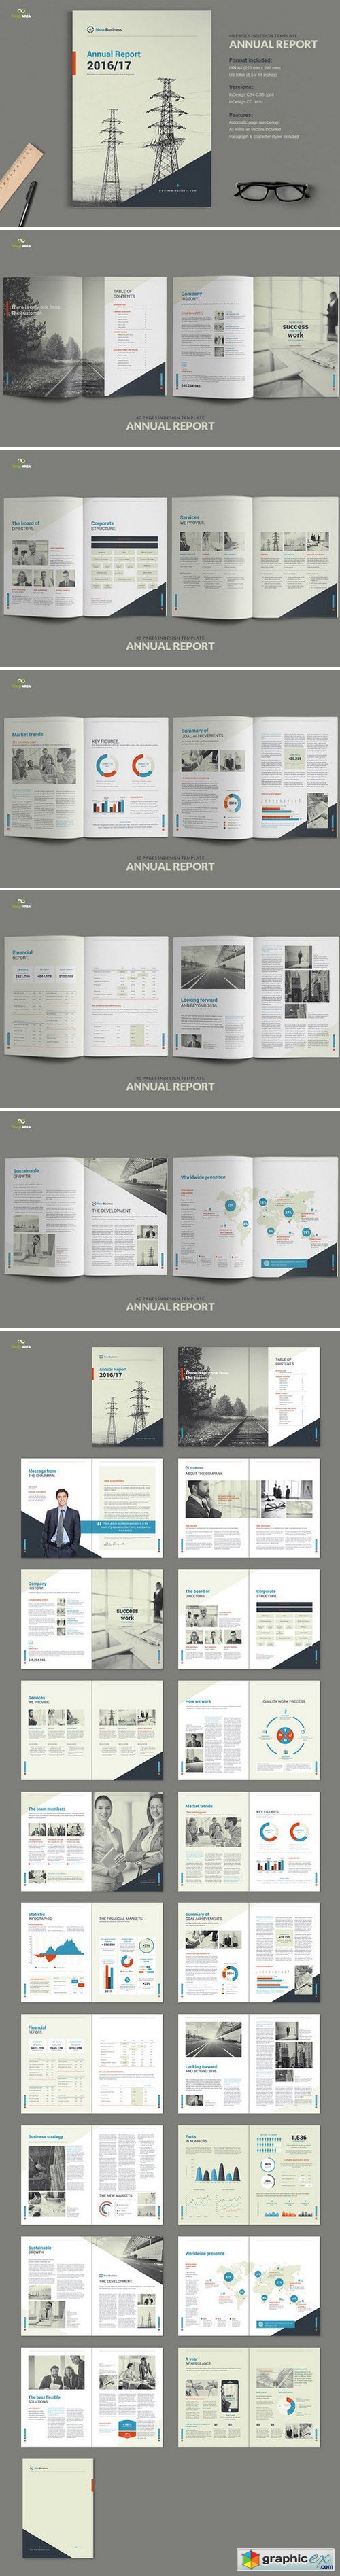 Annual Report - 40 pages